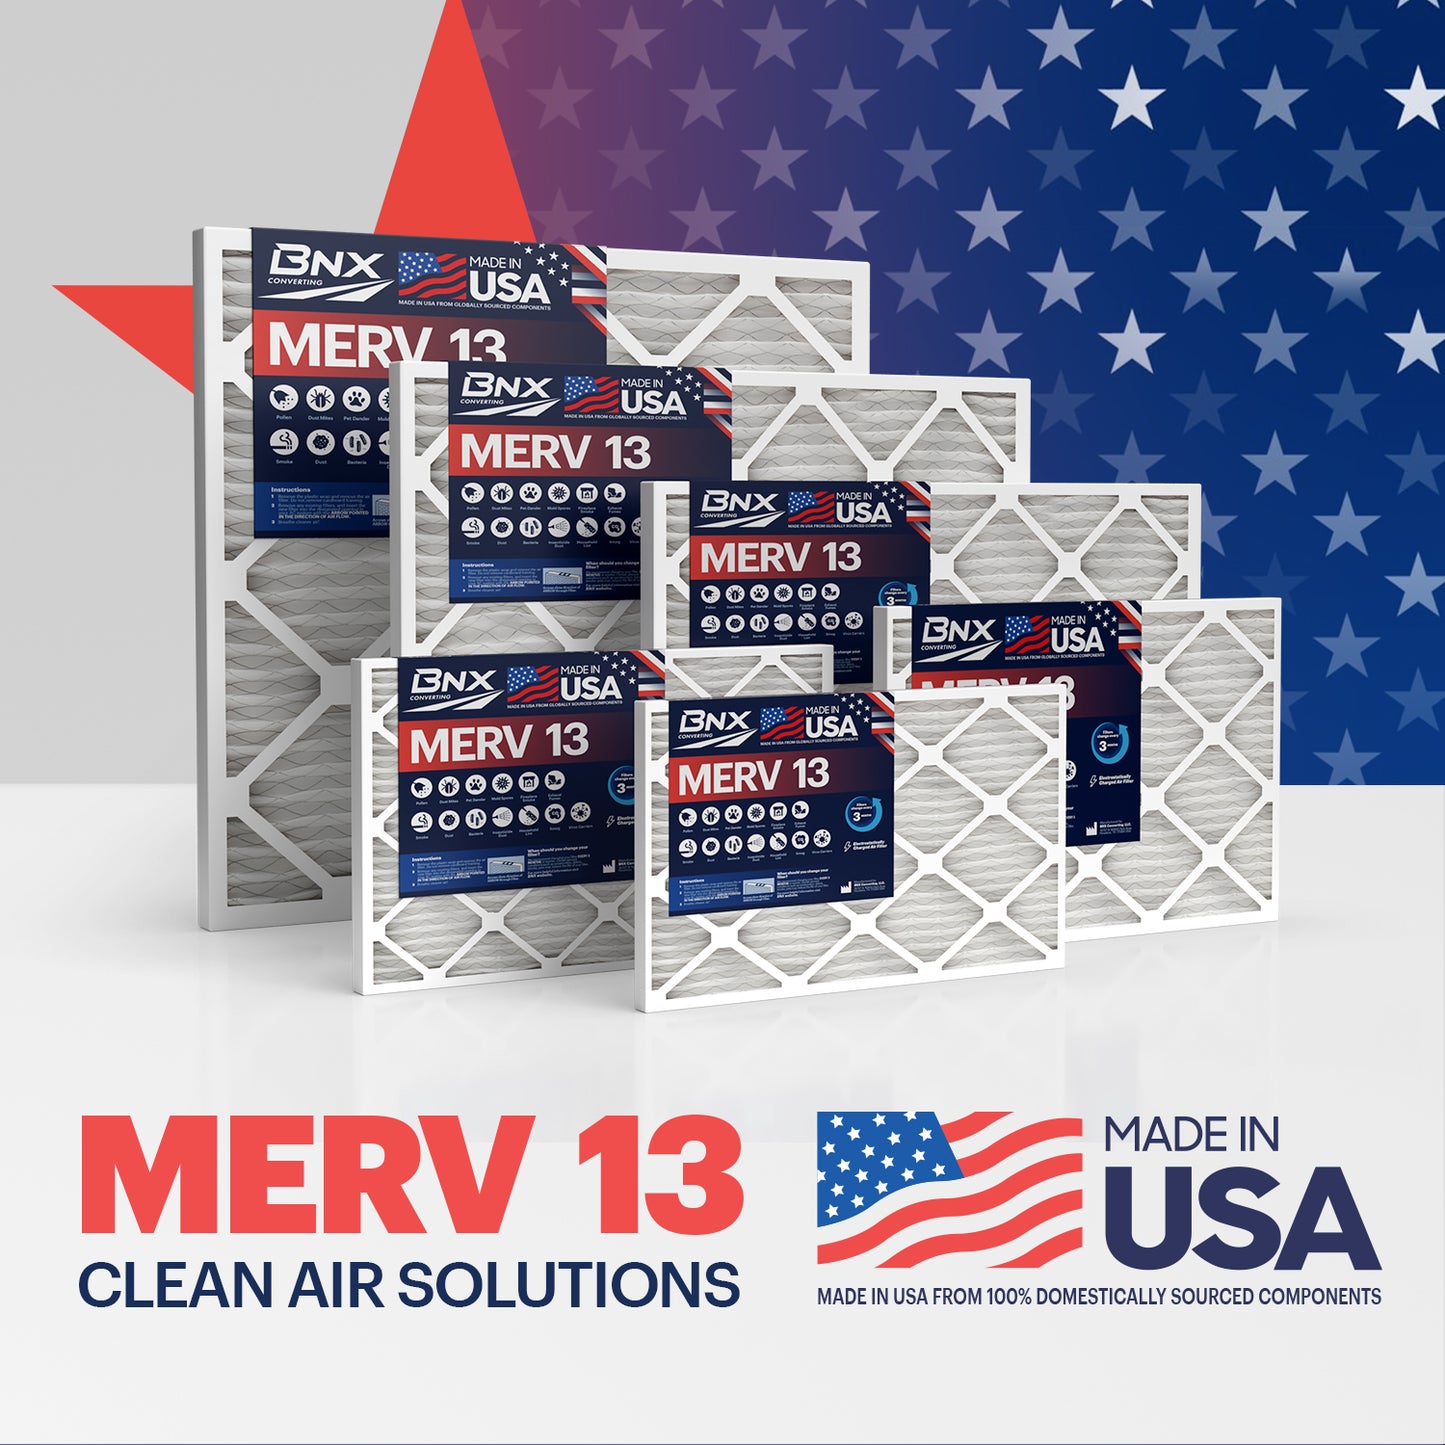 BNX TruFilter 14x20x1 MERV 13 Pleated Air Filter – Made in USA (4-Pack)